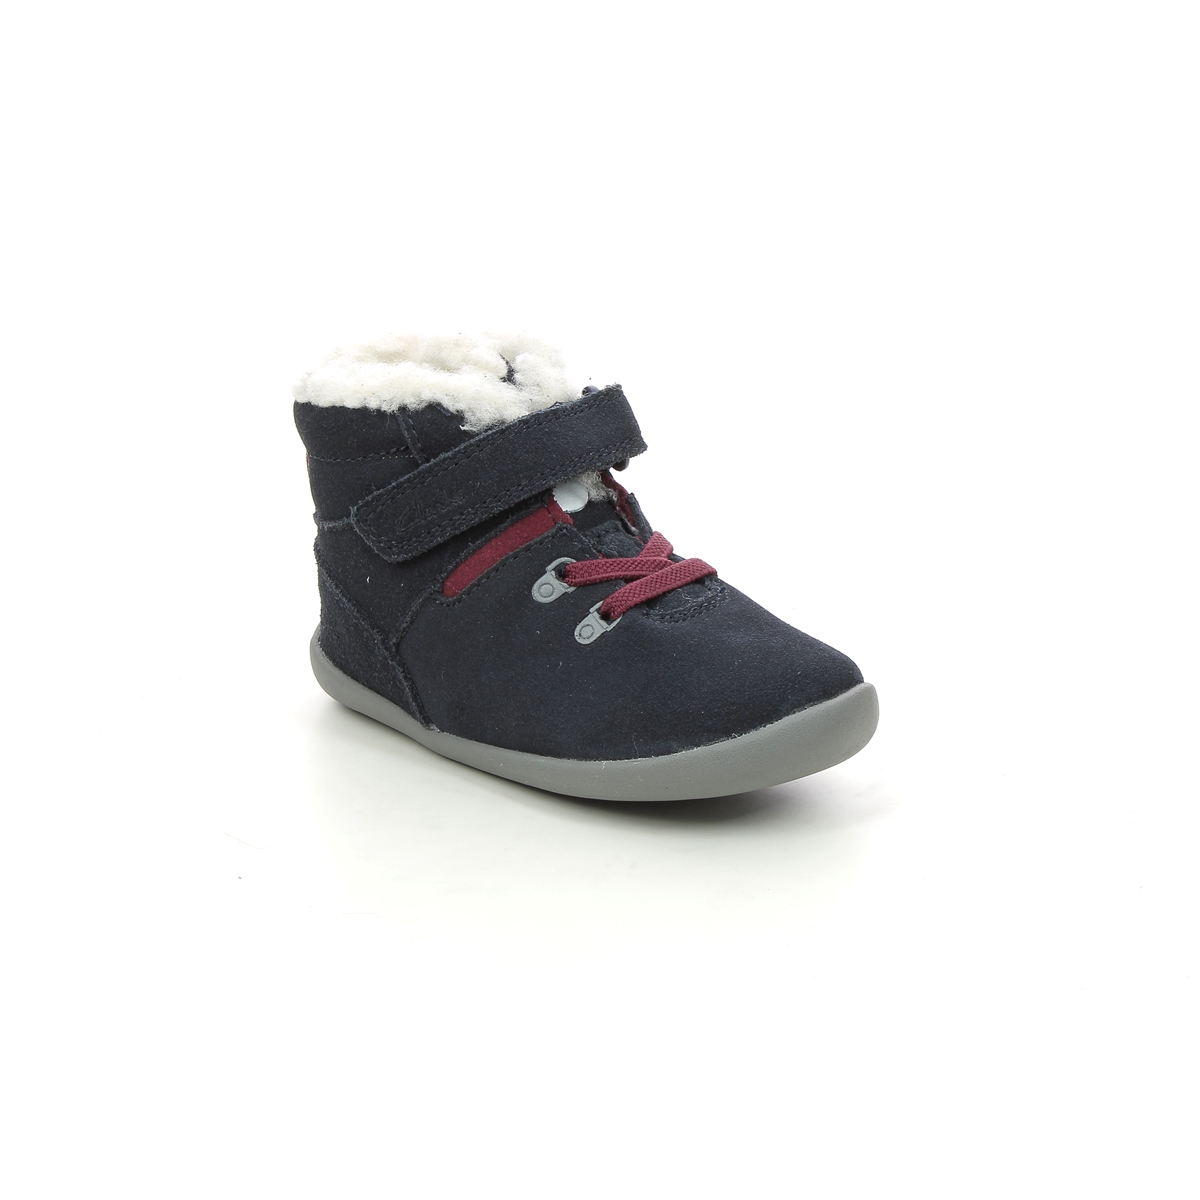 Clarks Roamer Snug T Navy Suede Kids Boys First Shoes 6143-67G in a Plain Leather in Size 3.5